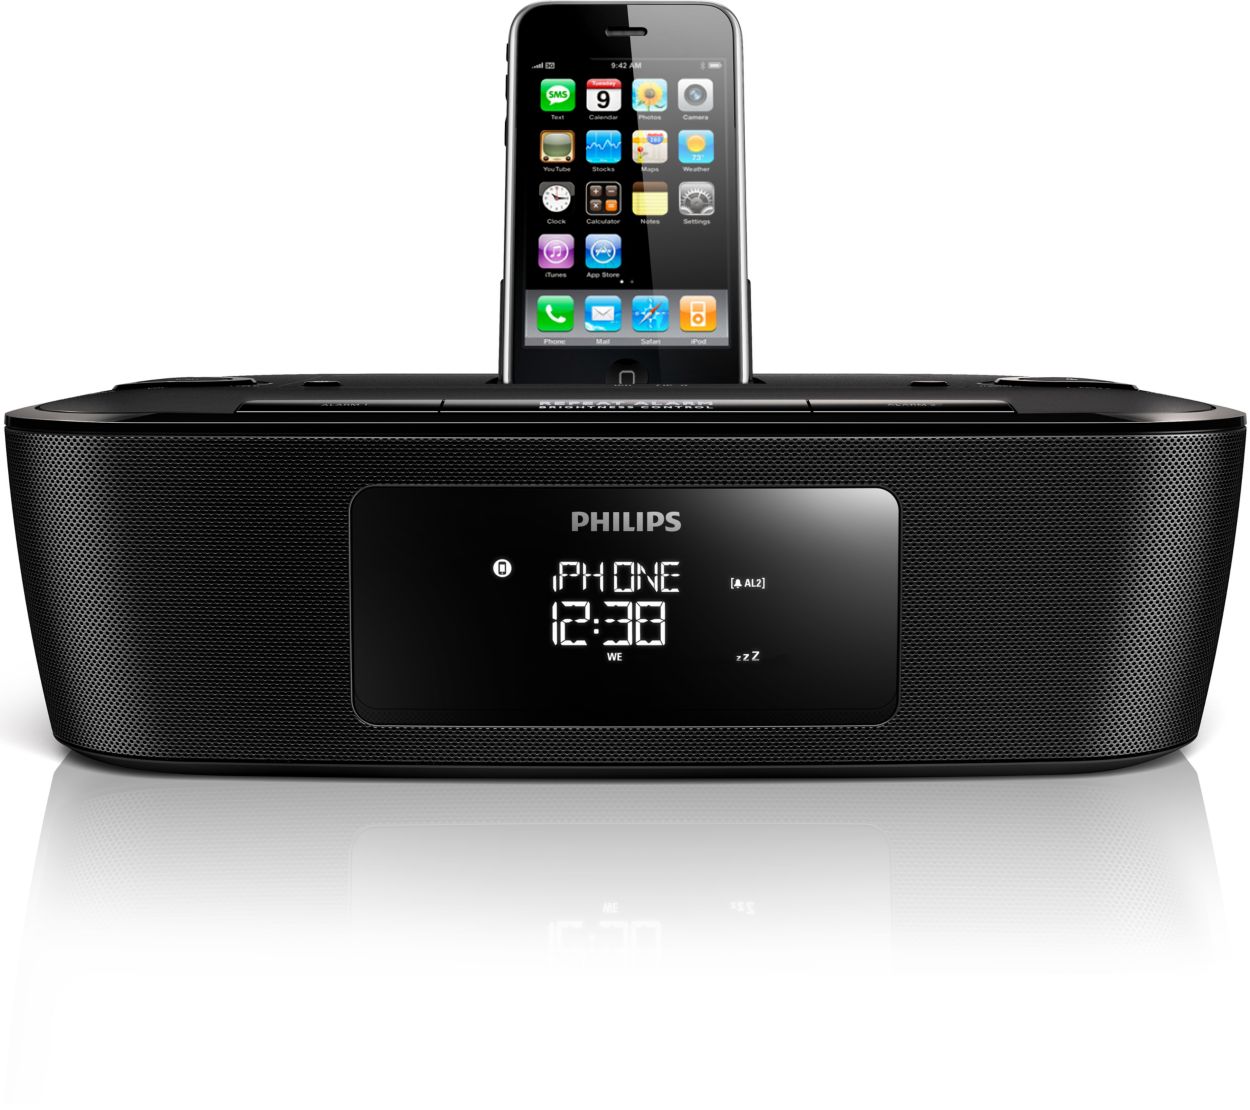 docking station for iPod/iPhone DCB242/79 Philips